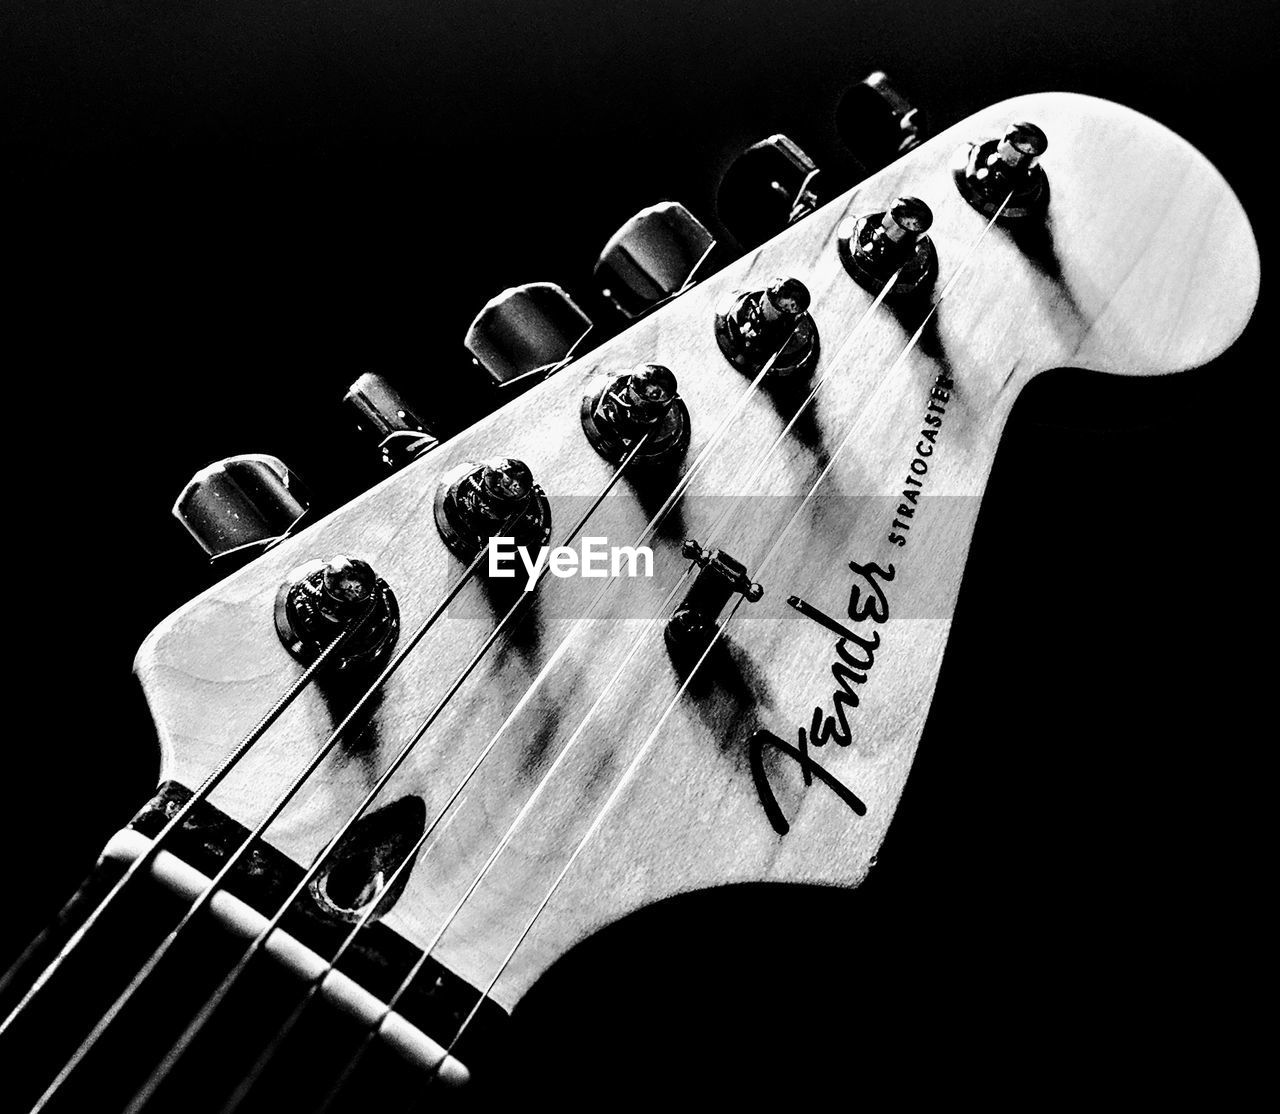 HIGH ANGLE VIEW OF GUITAR PLAYING WITH BLACK BACKGROUND